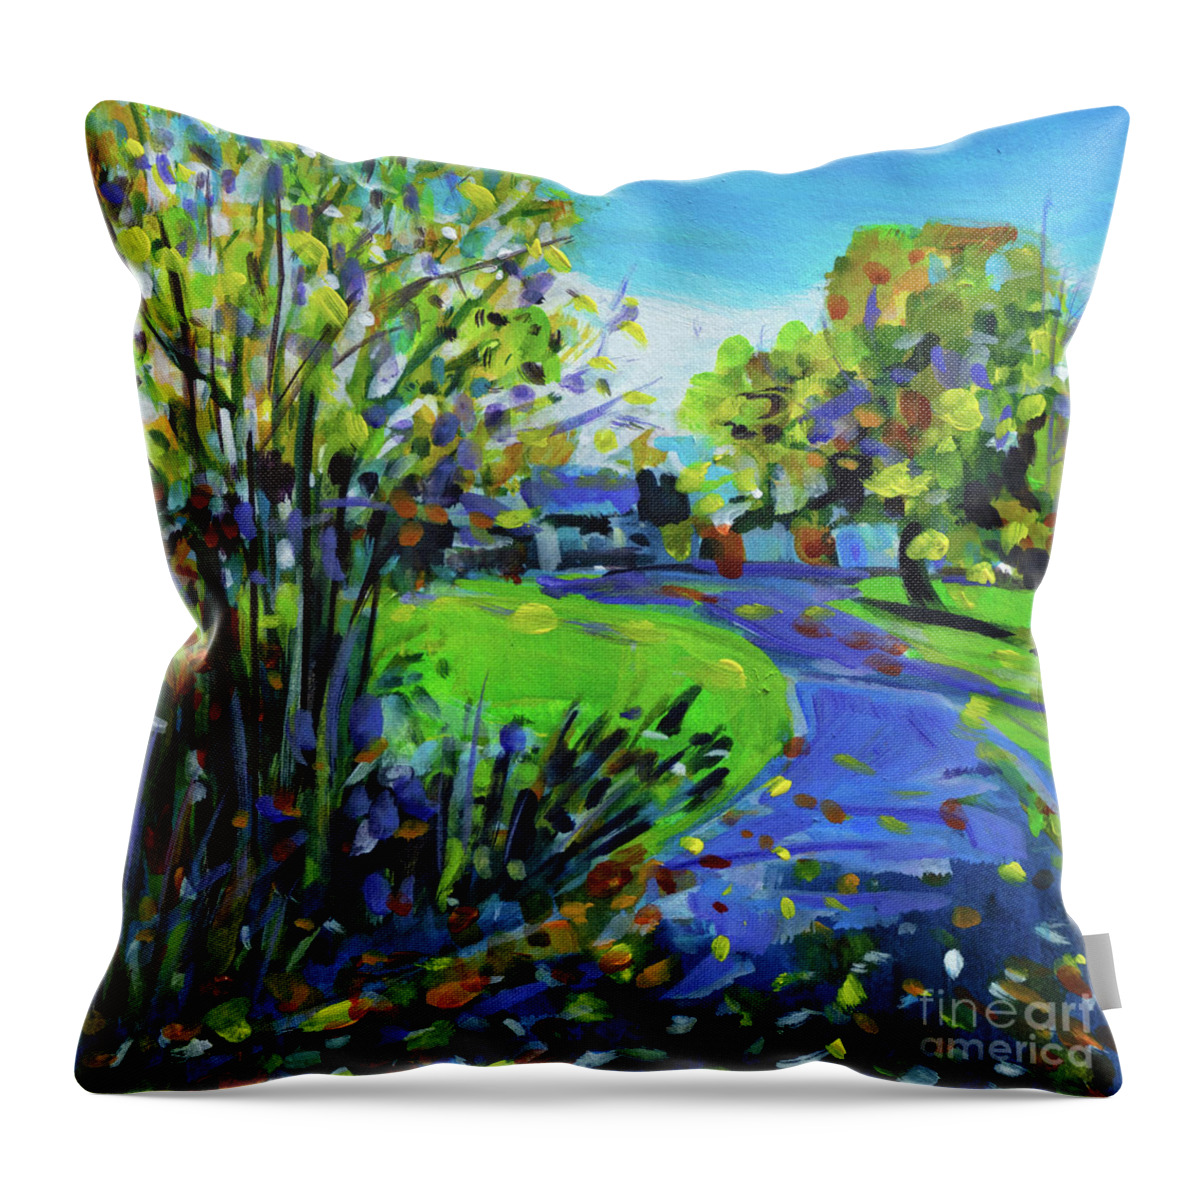 Landscape Painting Throw Pillow featuring the painting Capturing The Spirit Of Change by Tanya Filichkin